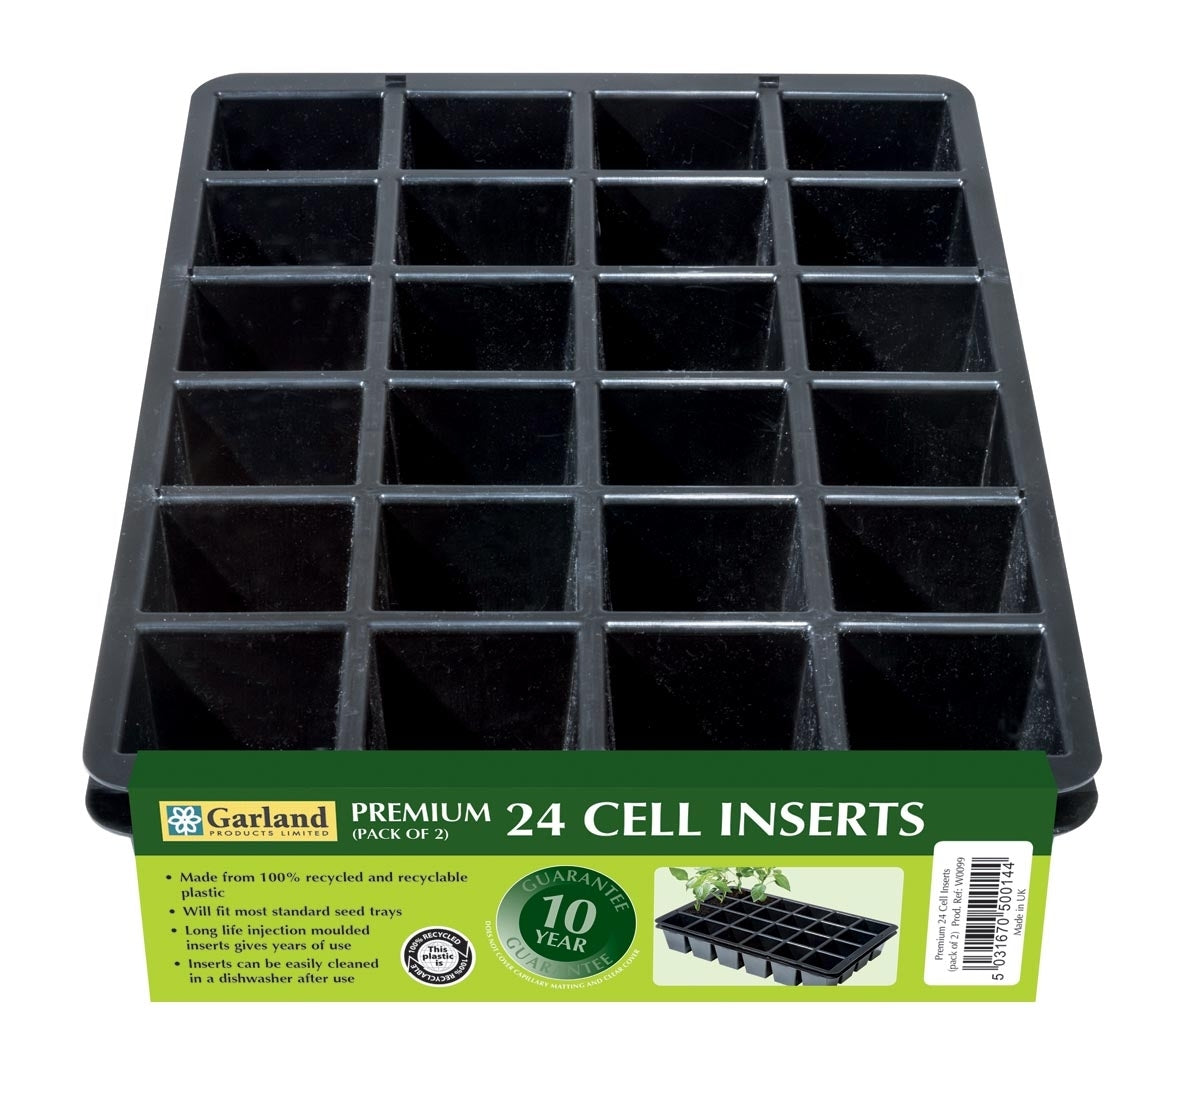  Garland Premium Cell Inserts (Pack of 2) G207, G208 The Green Thumb Club